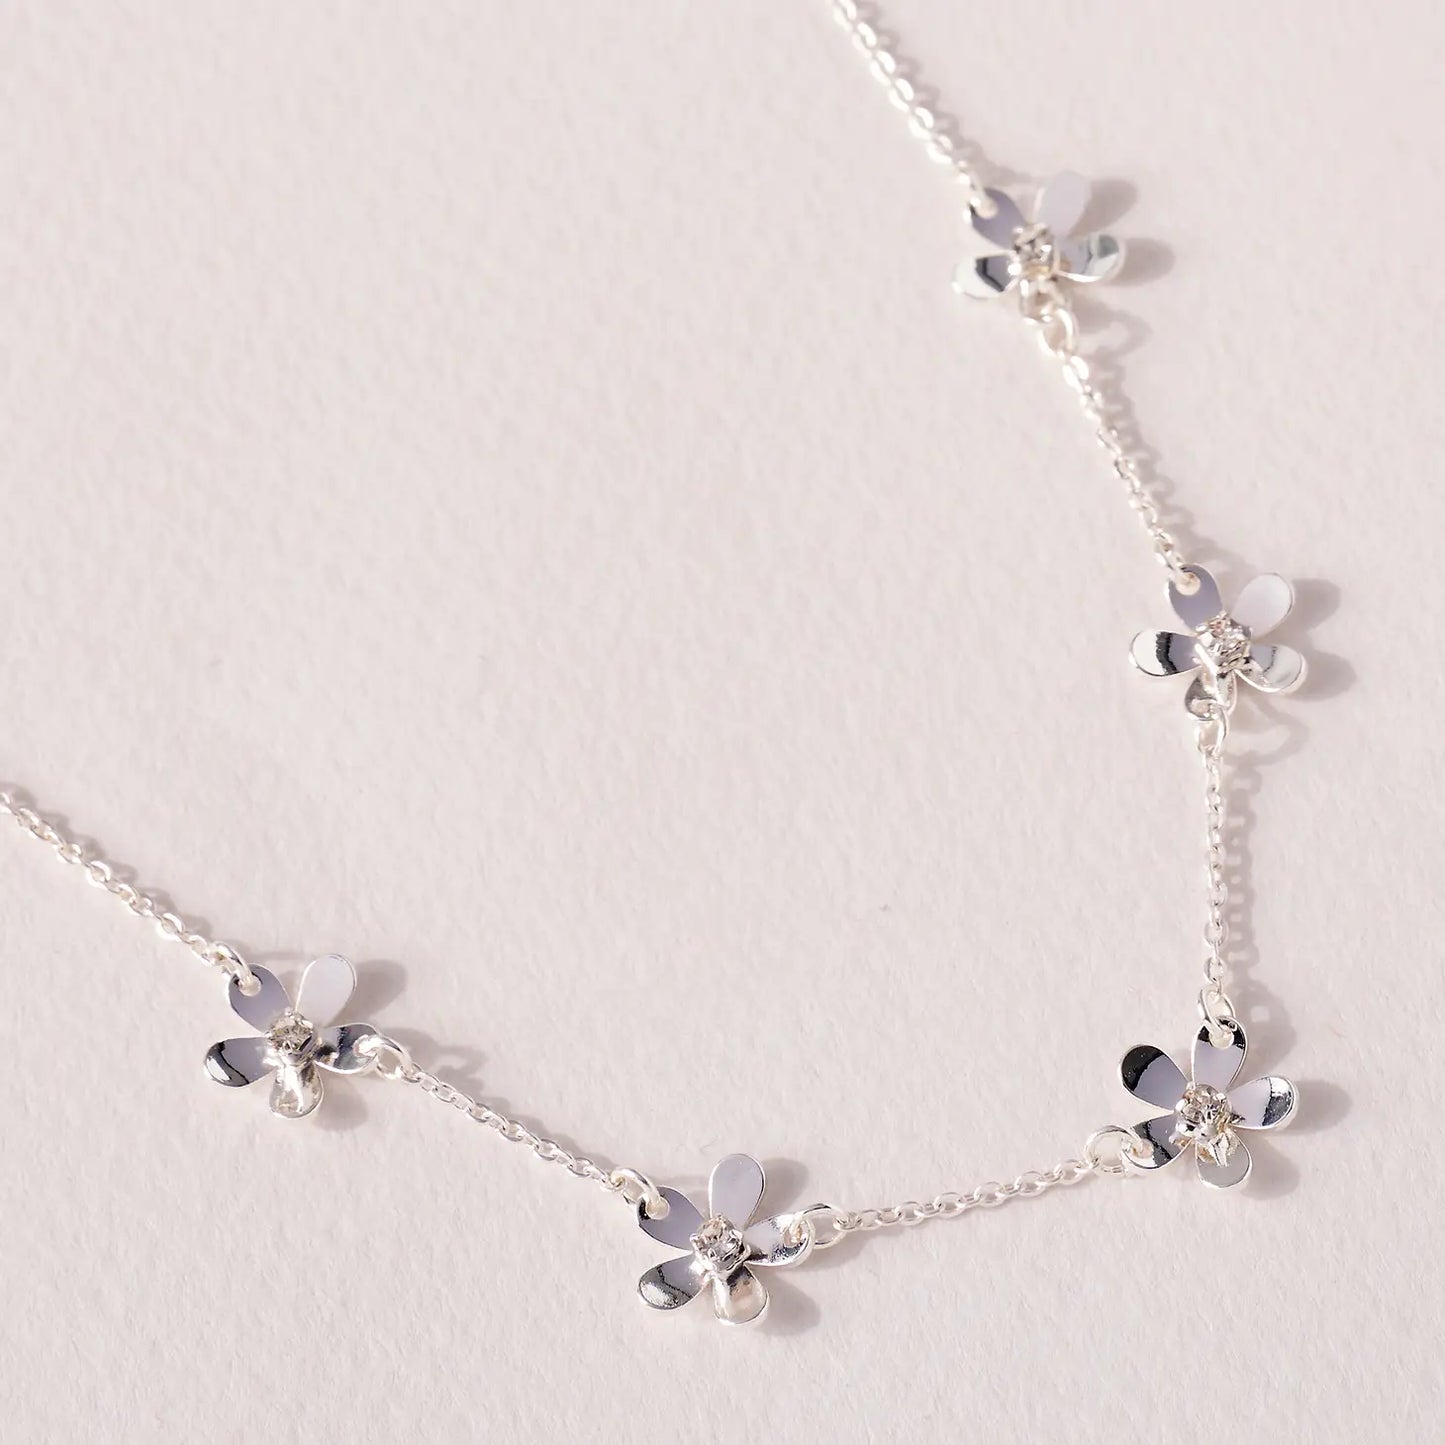 Silver Daisy Charm Necklace